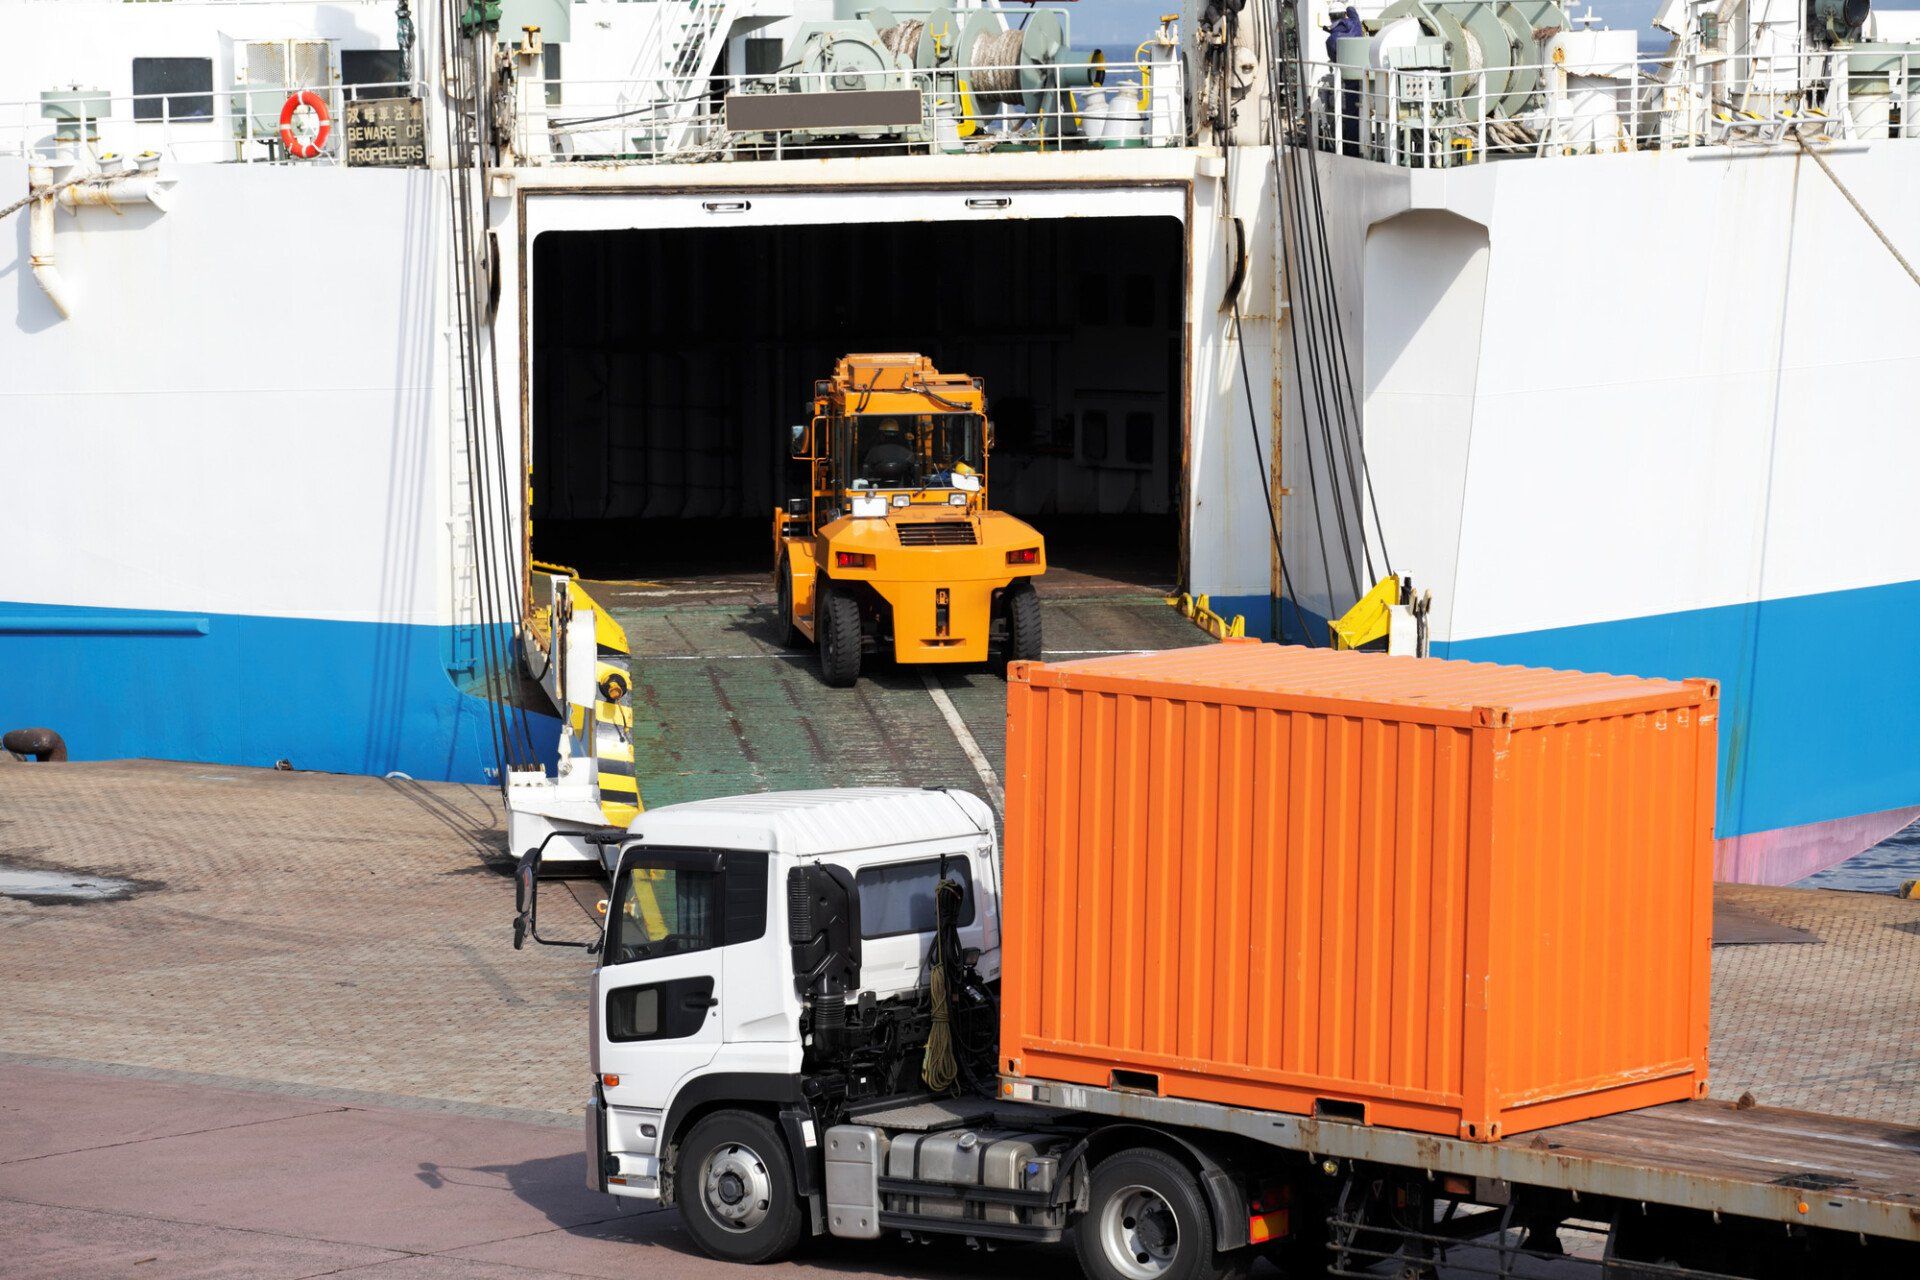 Unloading refrigerated containers in a port